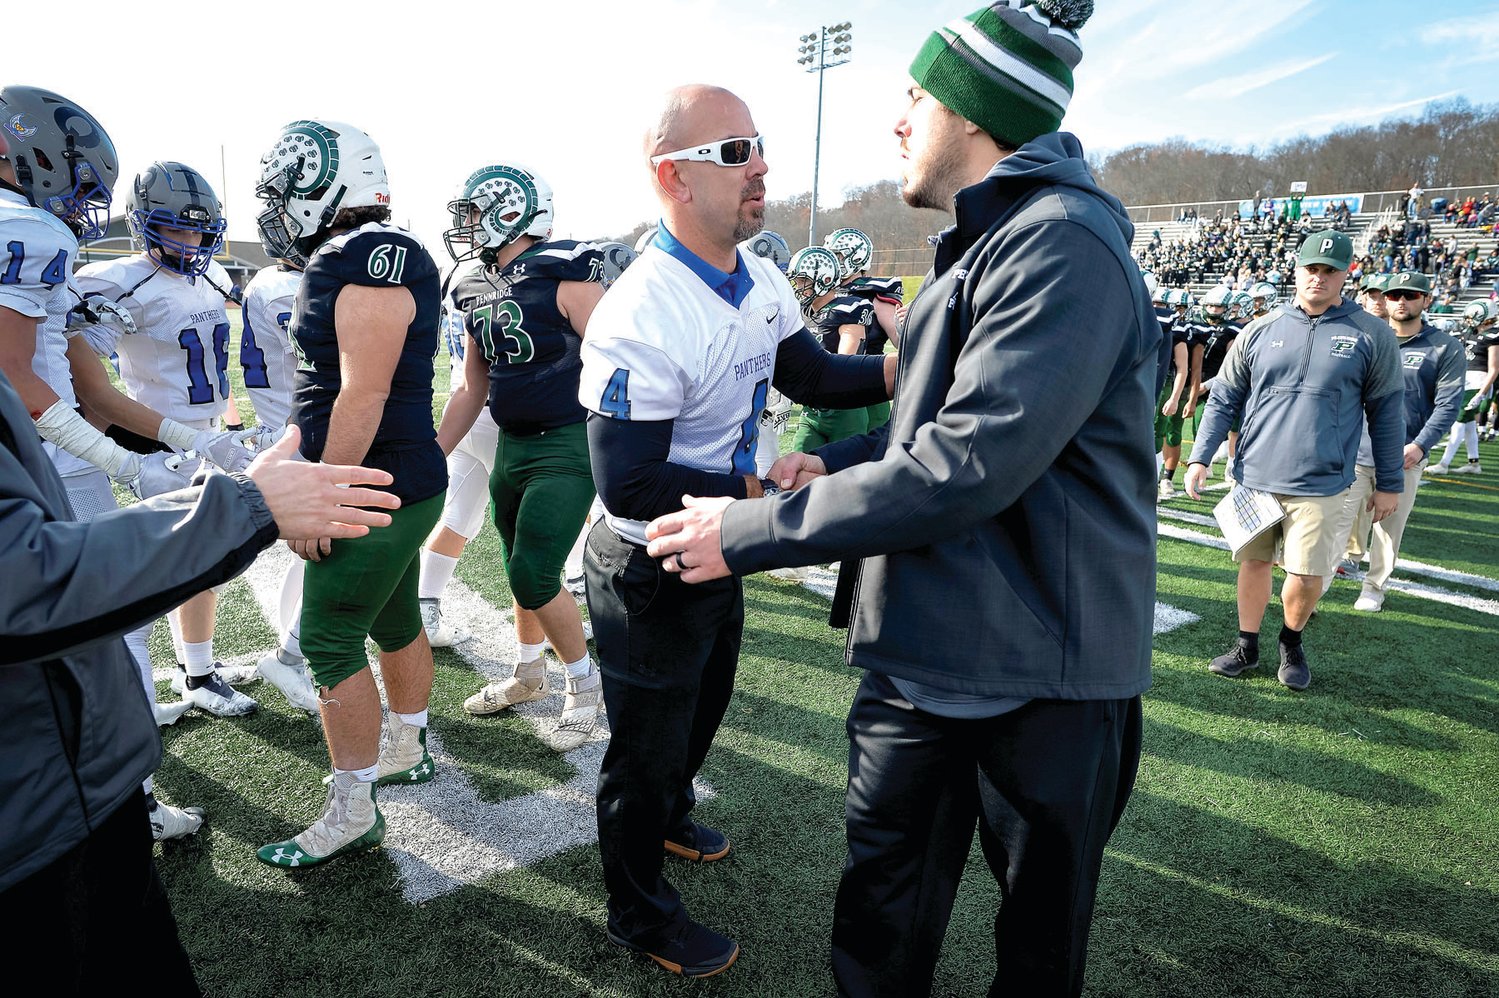 The coaches shake hands at midfield after Quakertown shut out Pennridge 21-0.